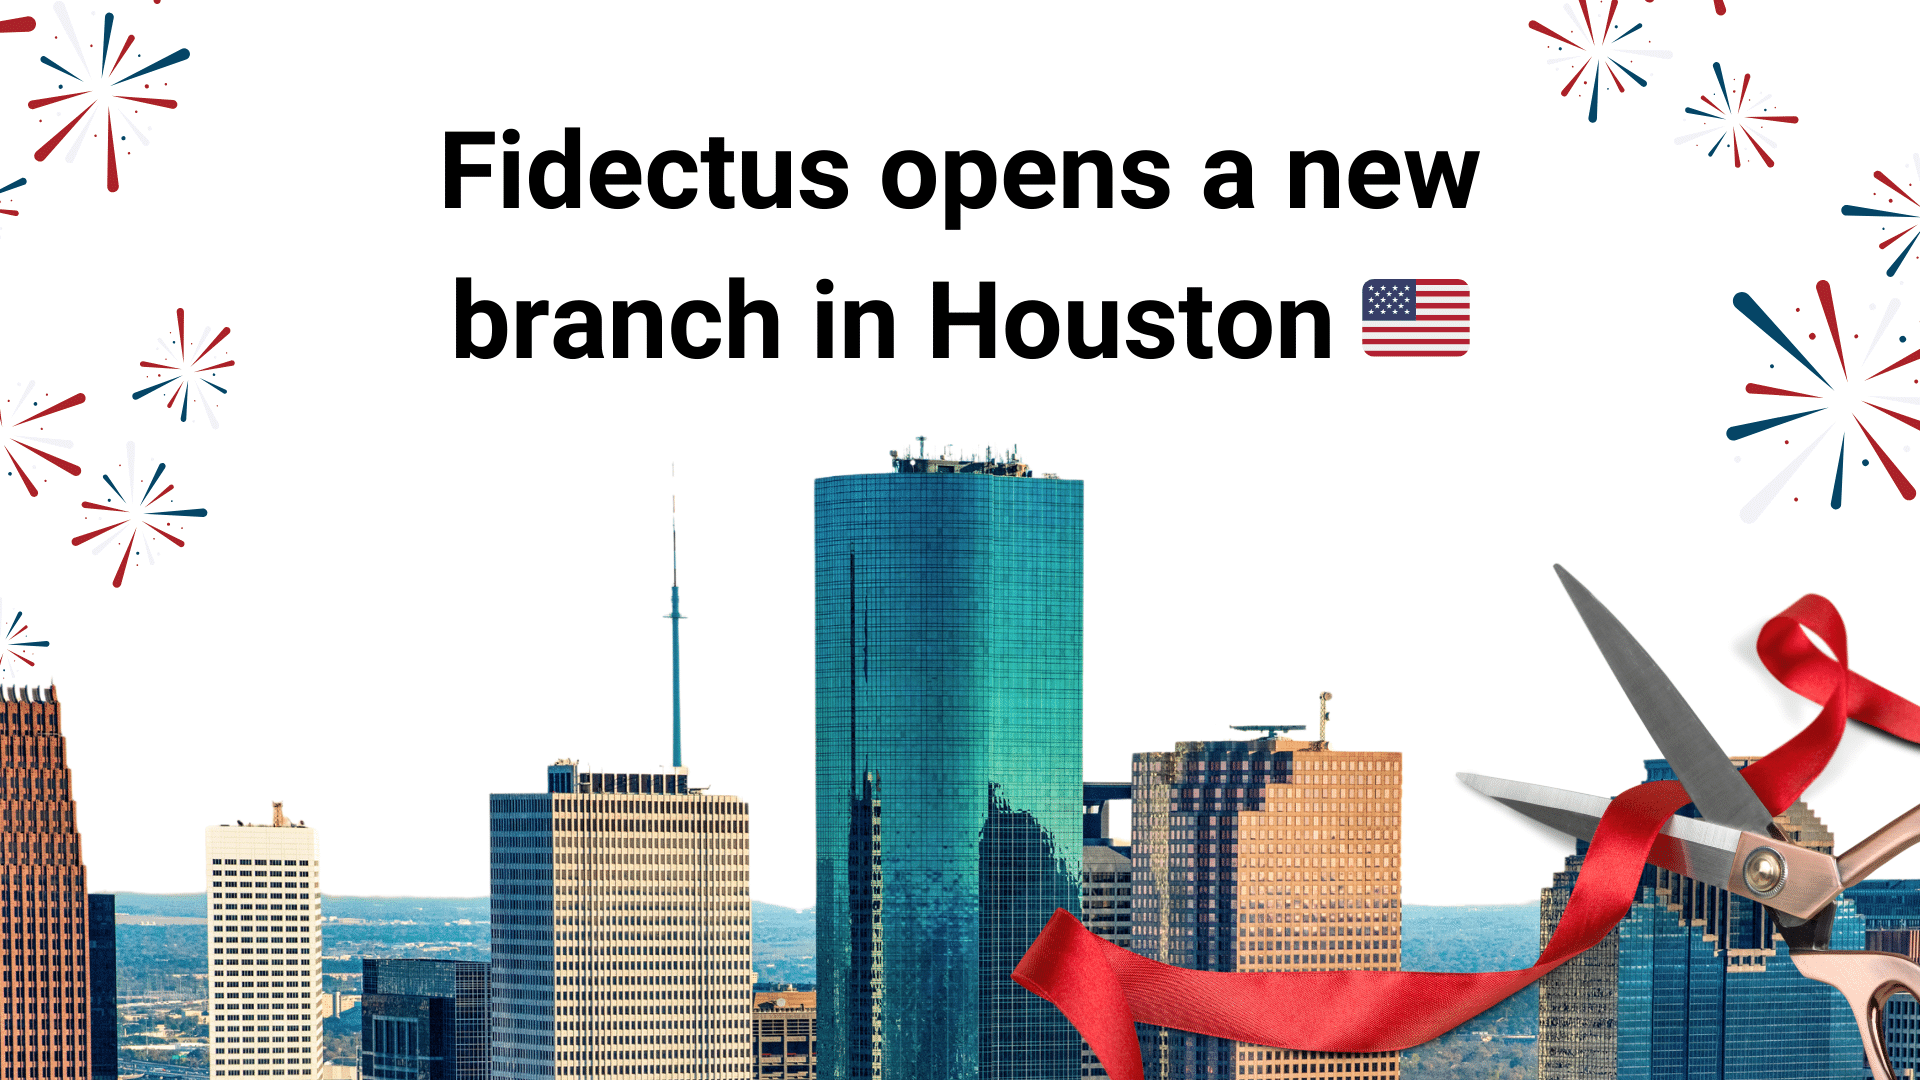 Fidectus opens a branch in Houston - image with fireworks and Houston's skyscrapers with a ribbon being cut